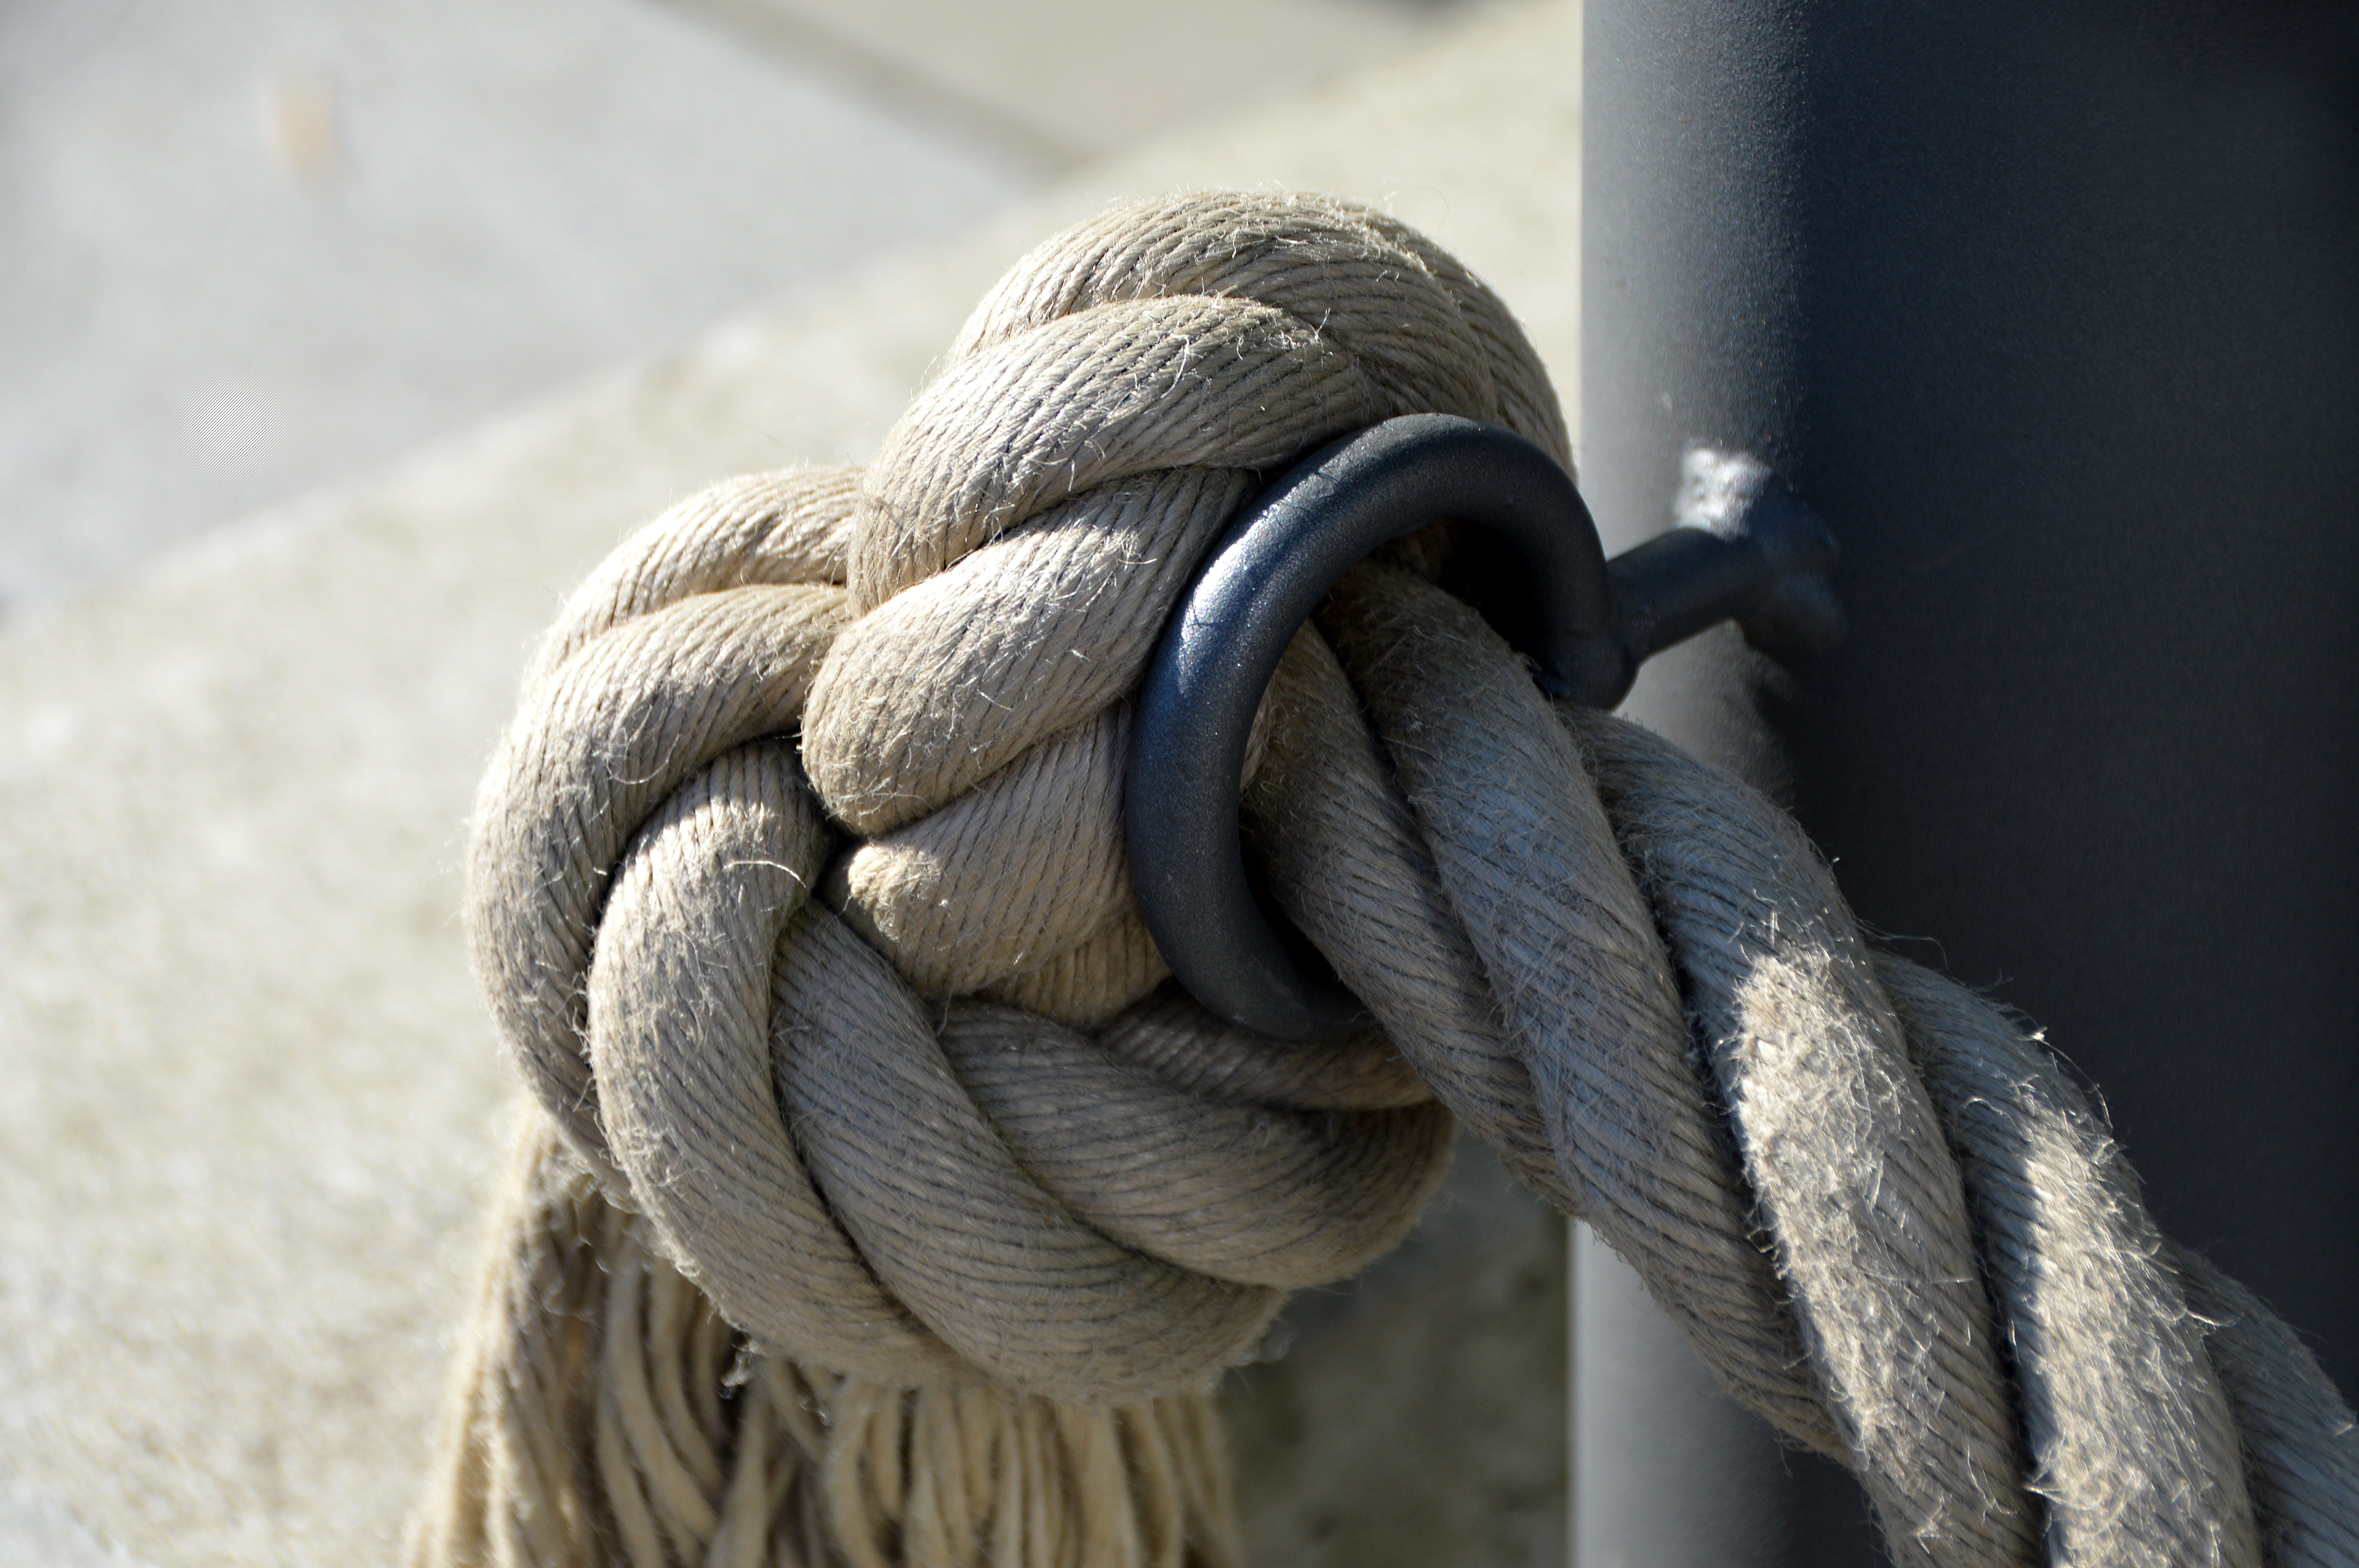 brown knot, hemp rope, rope knot, barrier, close up, ship traffic jams